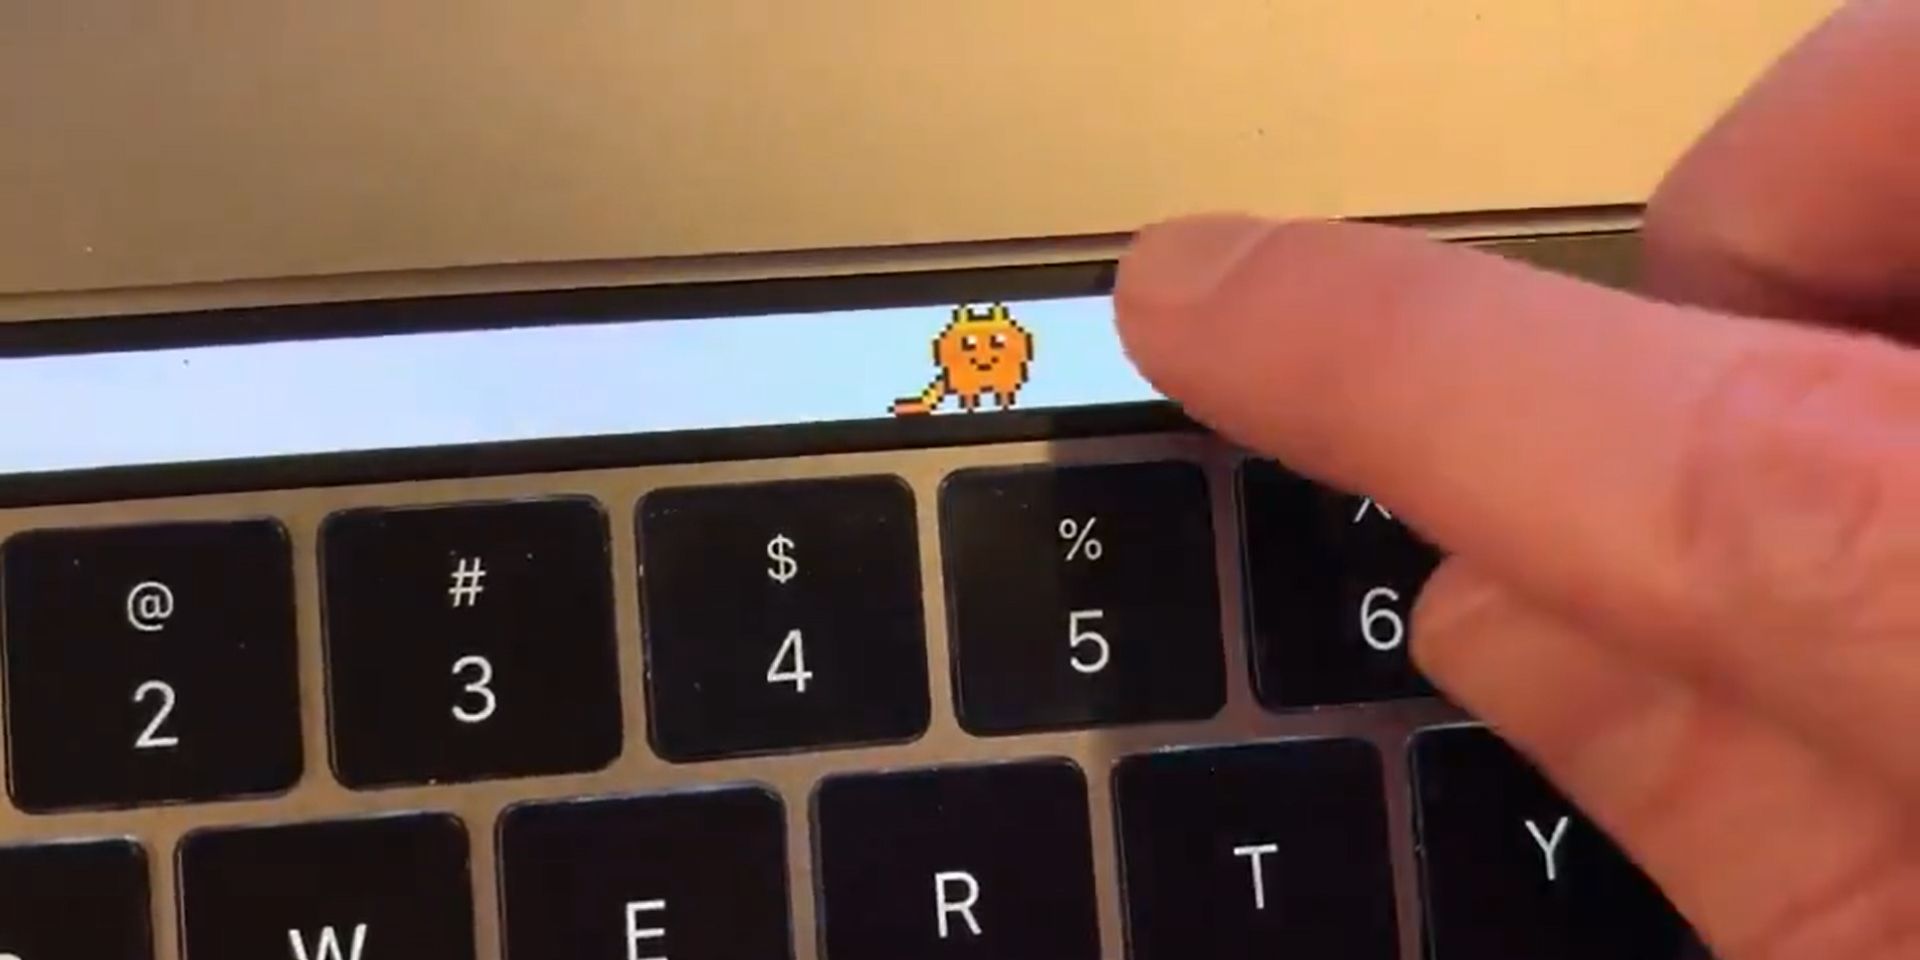 How To Add A Tamagotchi Pet To Your MacBook Touch Bar